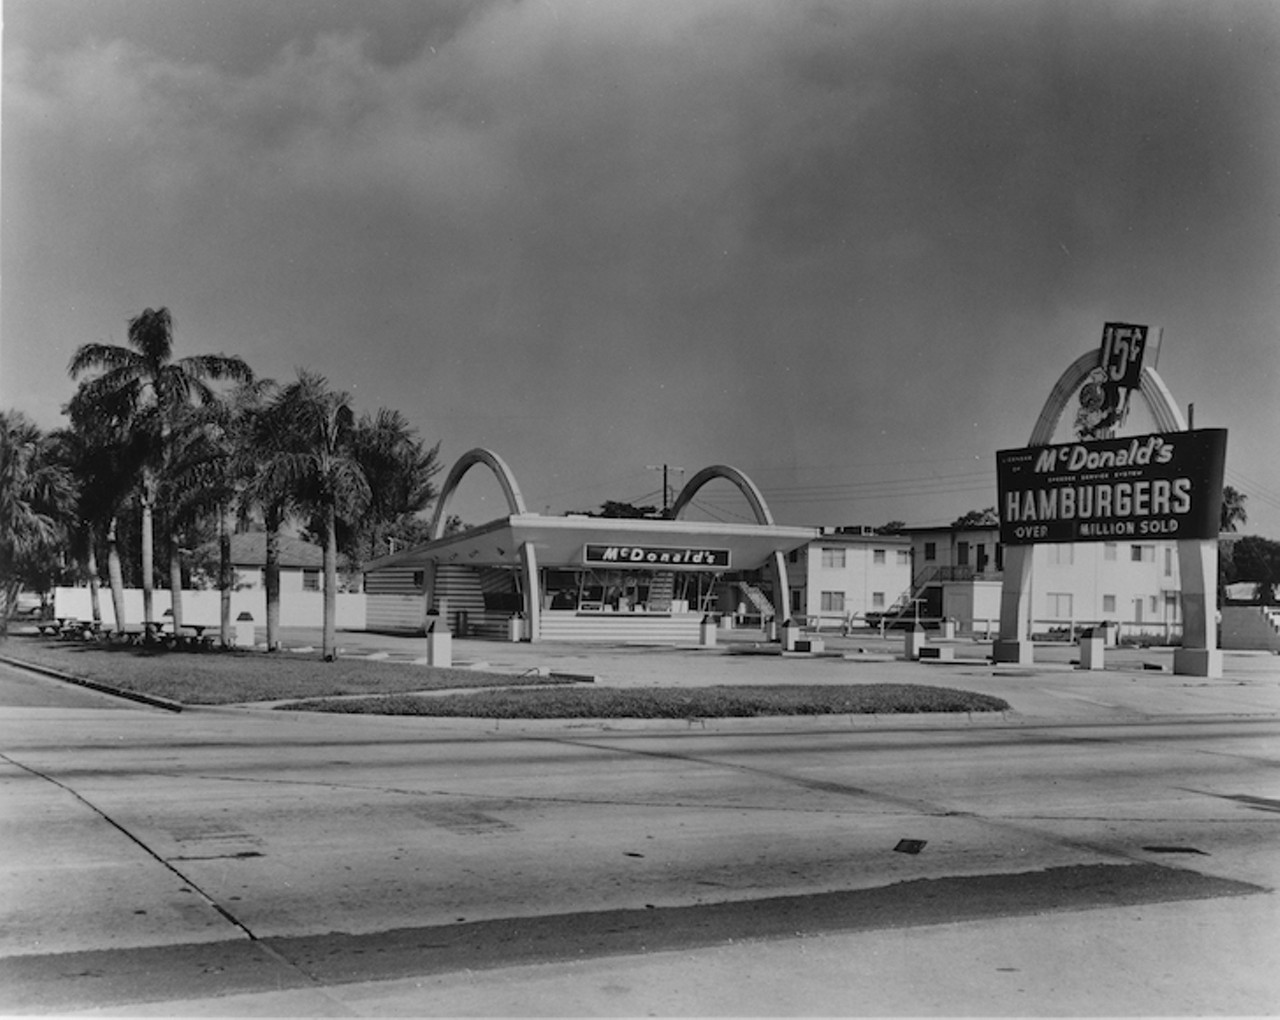 THEN
Mc Donald&#146;s 
3515 Dale Mabry Highway South, on the northwest corner of Dale Mabry Highway South and Kensington Street, 1962. 
Opened in 1958 as the first bay area McDonald&#146;s, this store was a staple for the H.B. Plant High School crowd and South Tampa residents for decades. The building was razed twice for new designs, but notice how they have attempted to keep the Florida feel with palm trees running along Kensington Avenue since the first build.